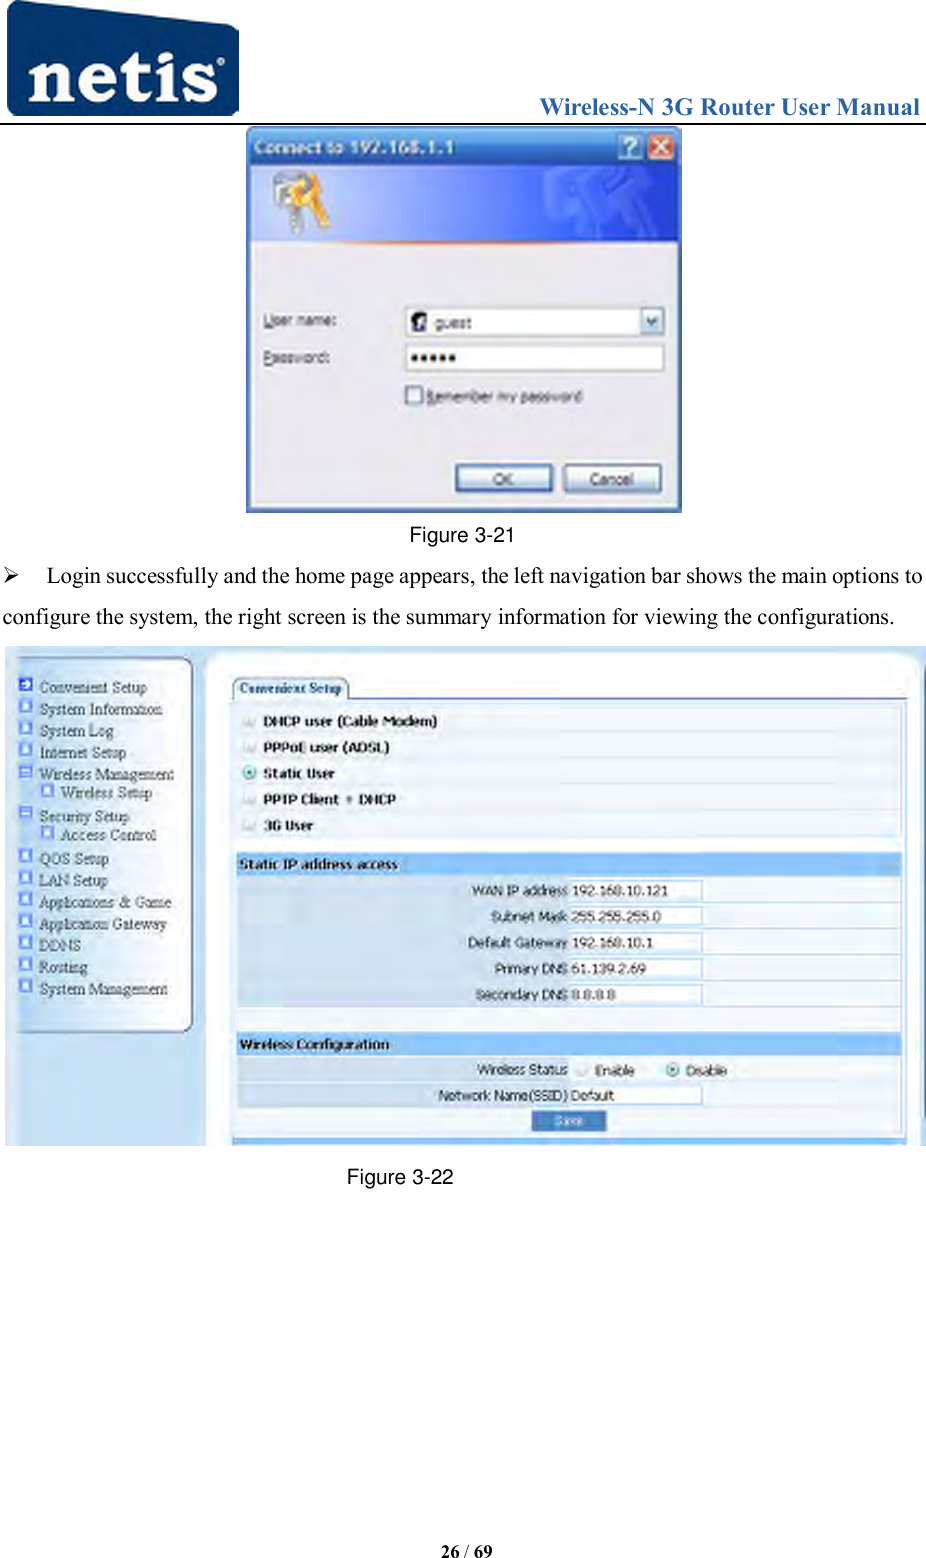                                 Wireless-N 3G Router User Manual  26 / 69  Figure 3-21  Login successfully and the home page appears, the left navigation bar shows the main options to configure the system, the right screen is the summary information for viewing the configurations.  Figure 3-22    